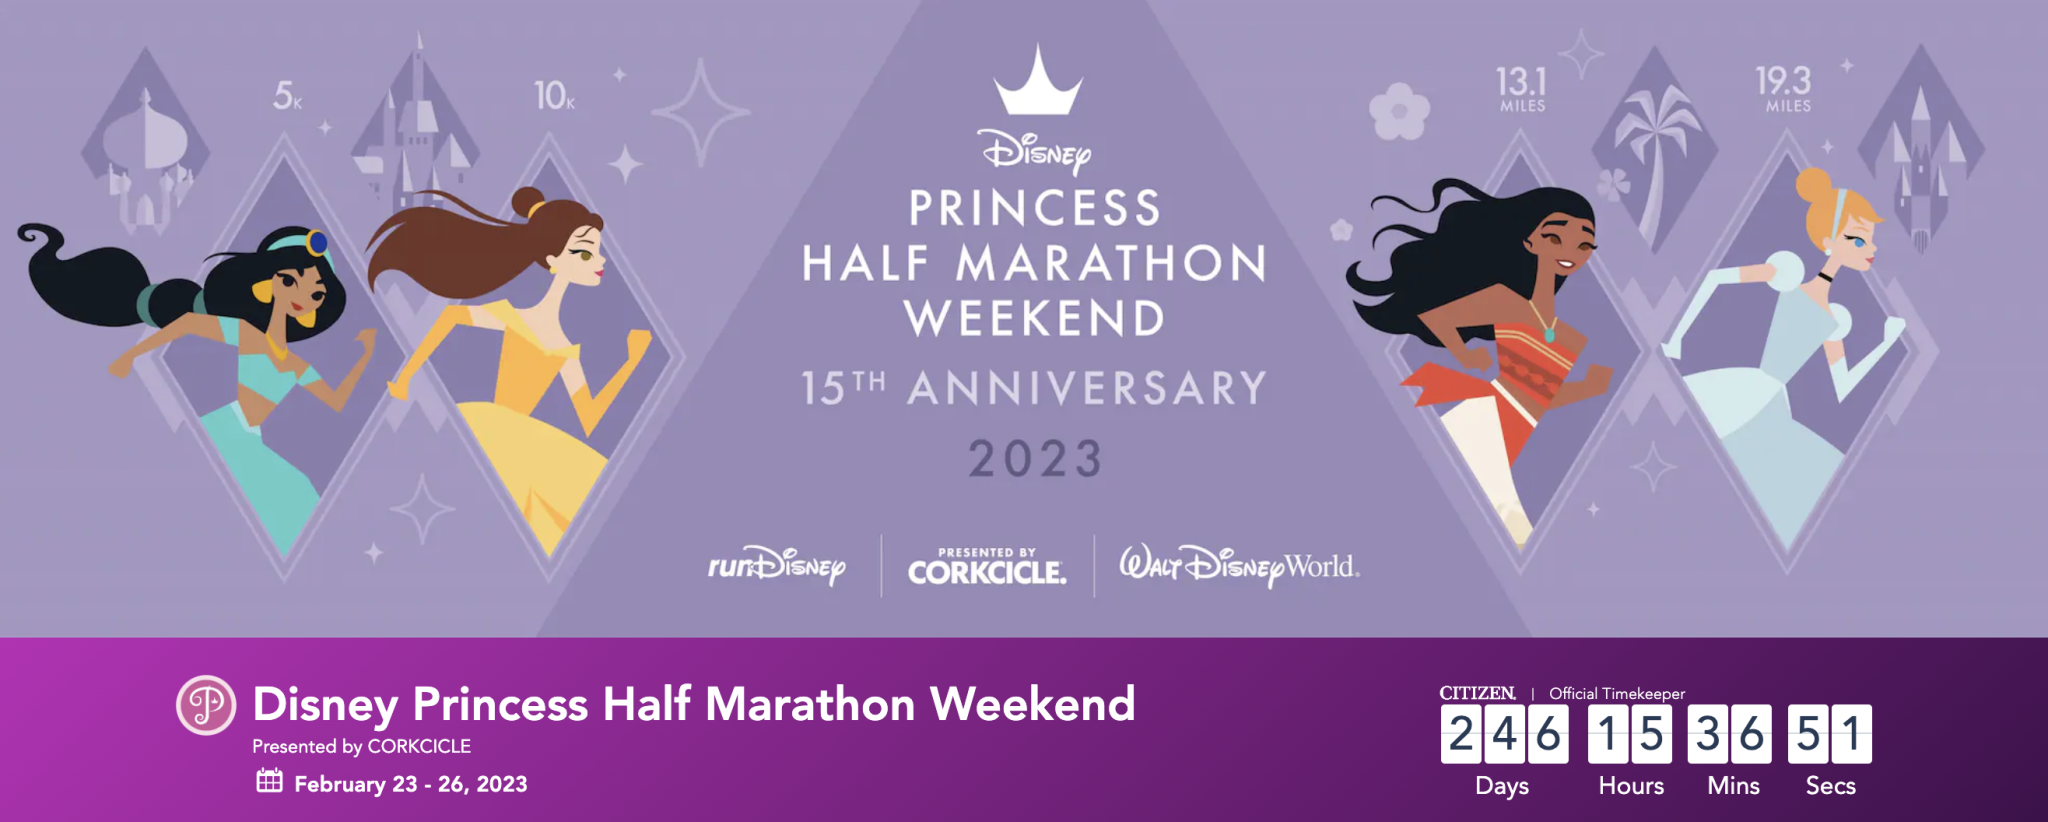 NEWS Registration Dates ANNOUNCED for 20232024 runDisney Races the